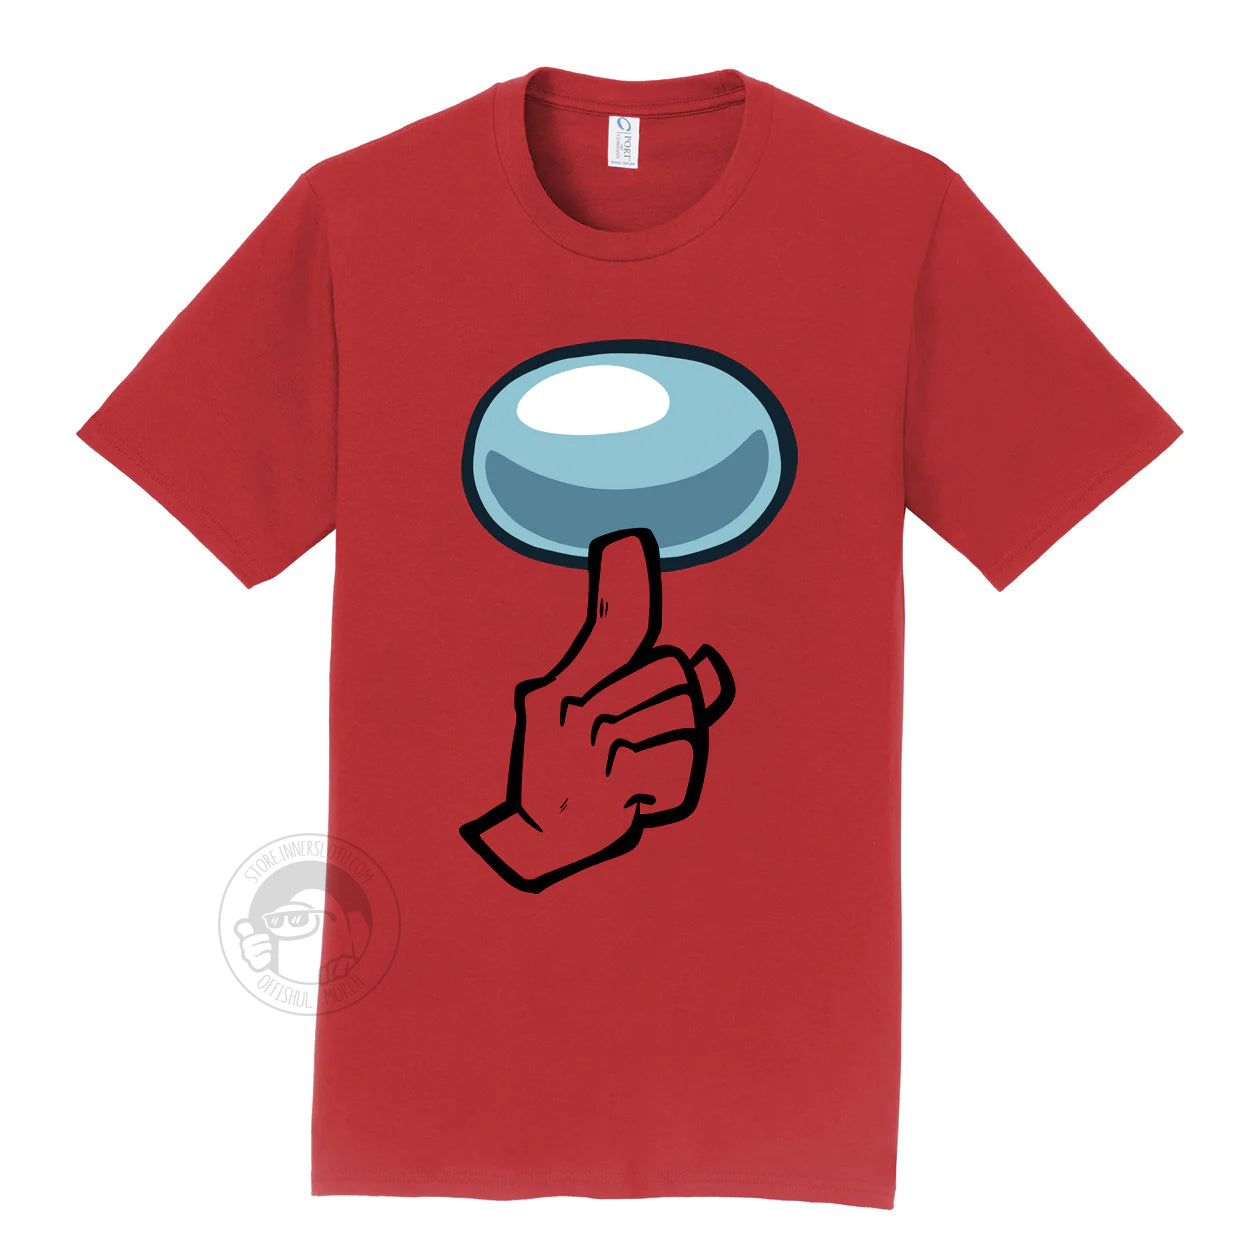 A product photograph of the Among Us: Shhhirt t-shirt in red. The art on the shirt shows the crewmate visor and a hand with one finger pointing up in a “shh”ing pose. 